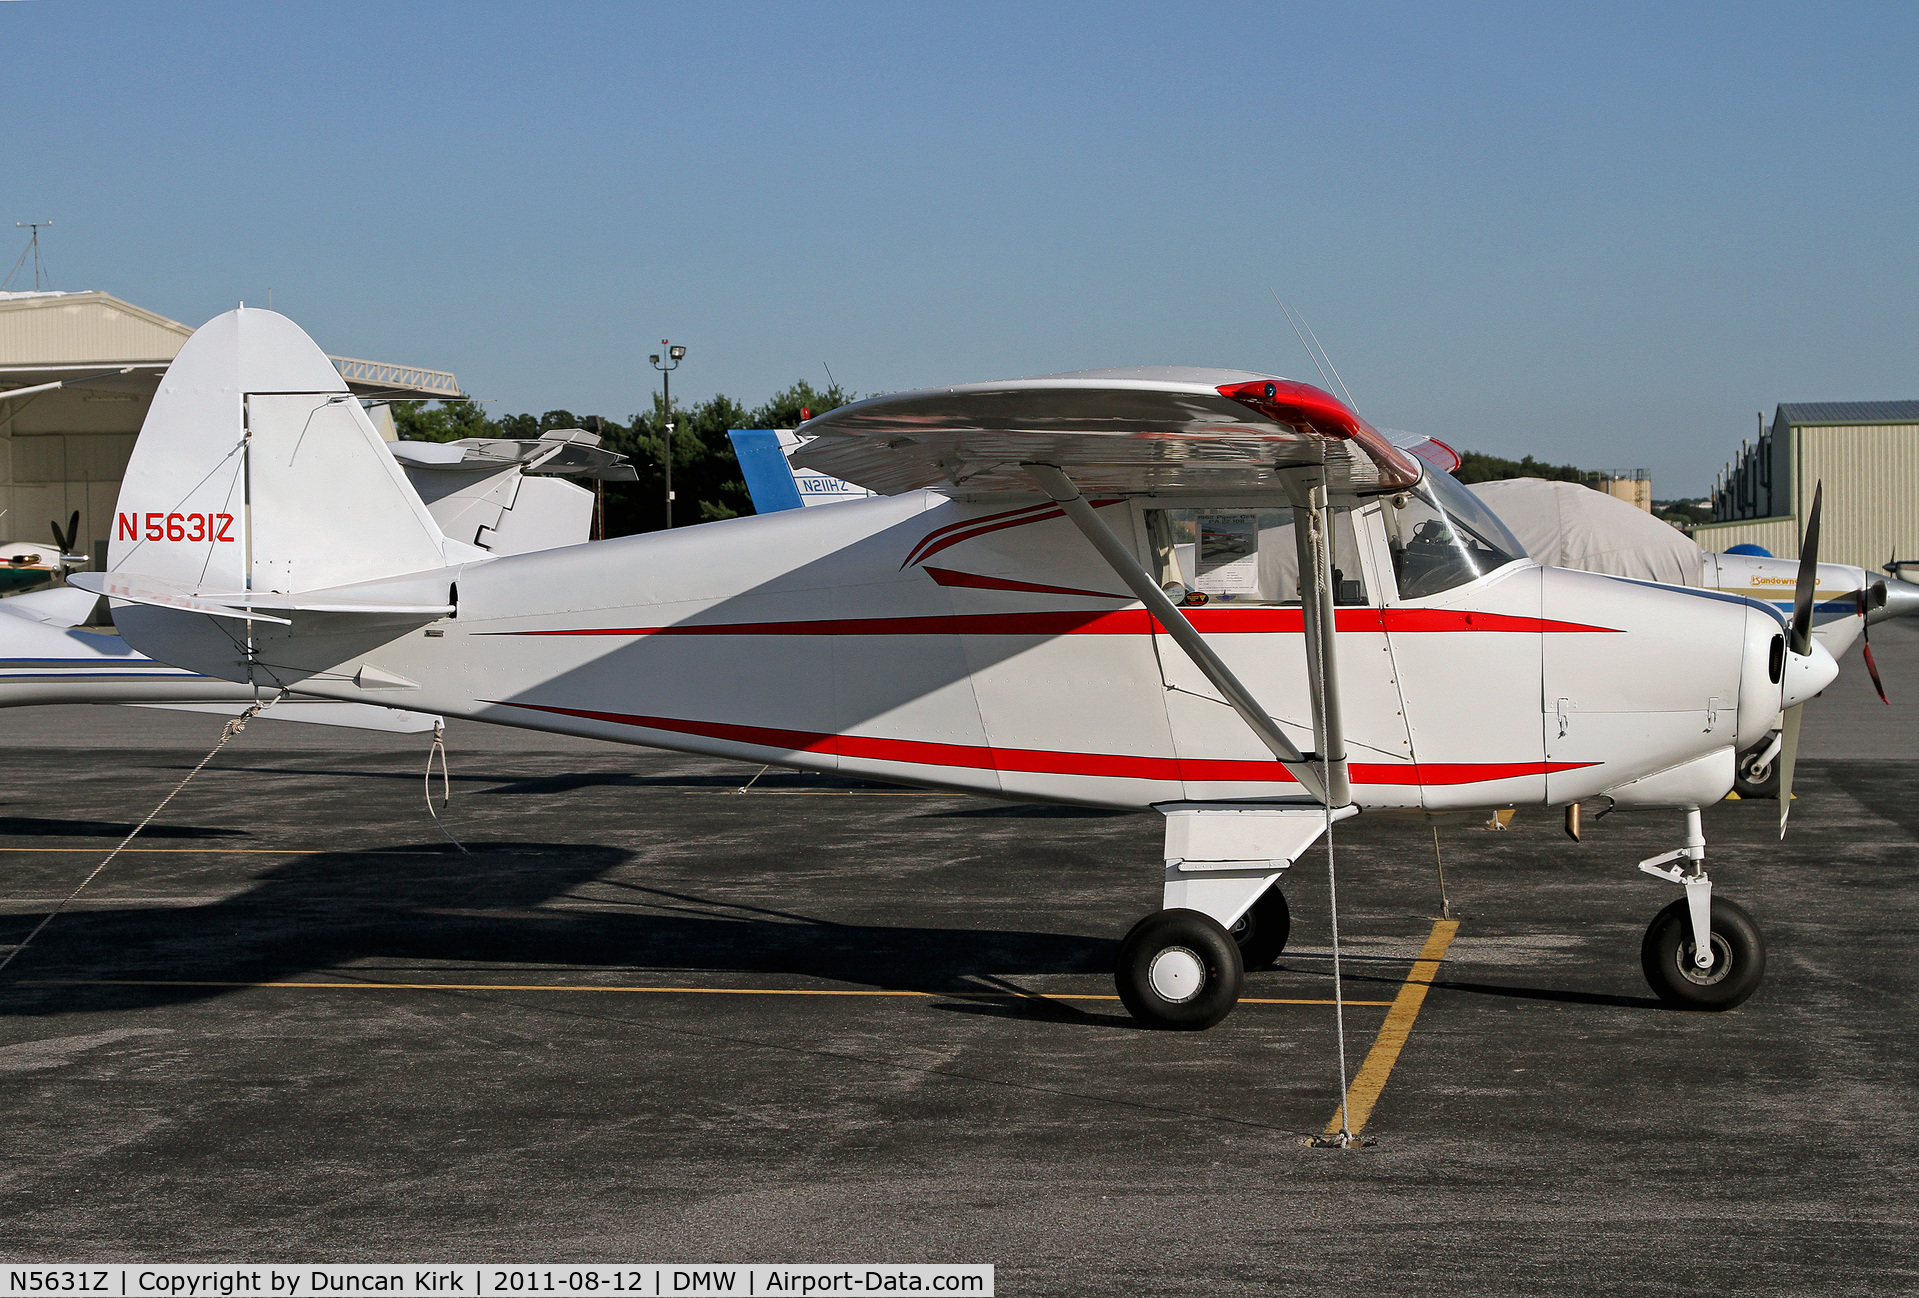 N5631Z, 1962 Piper PA-22-108 Colt C/N 22-9443, Fine example of a Tri-Pacer